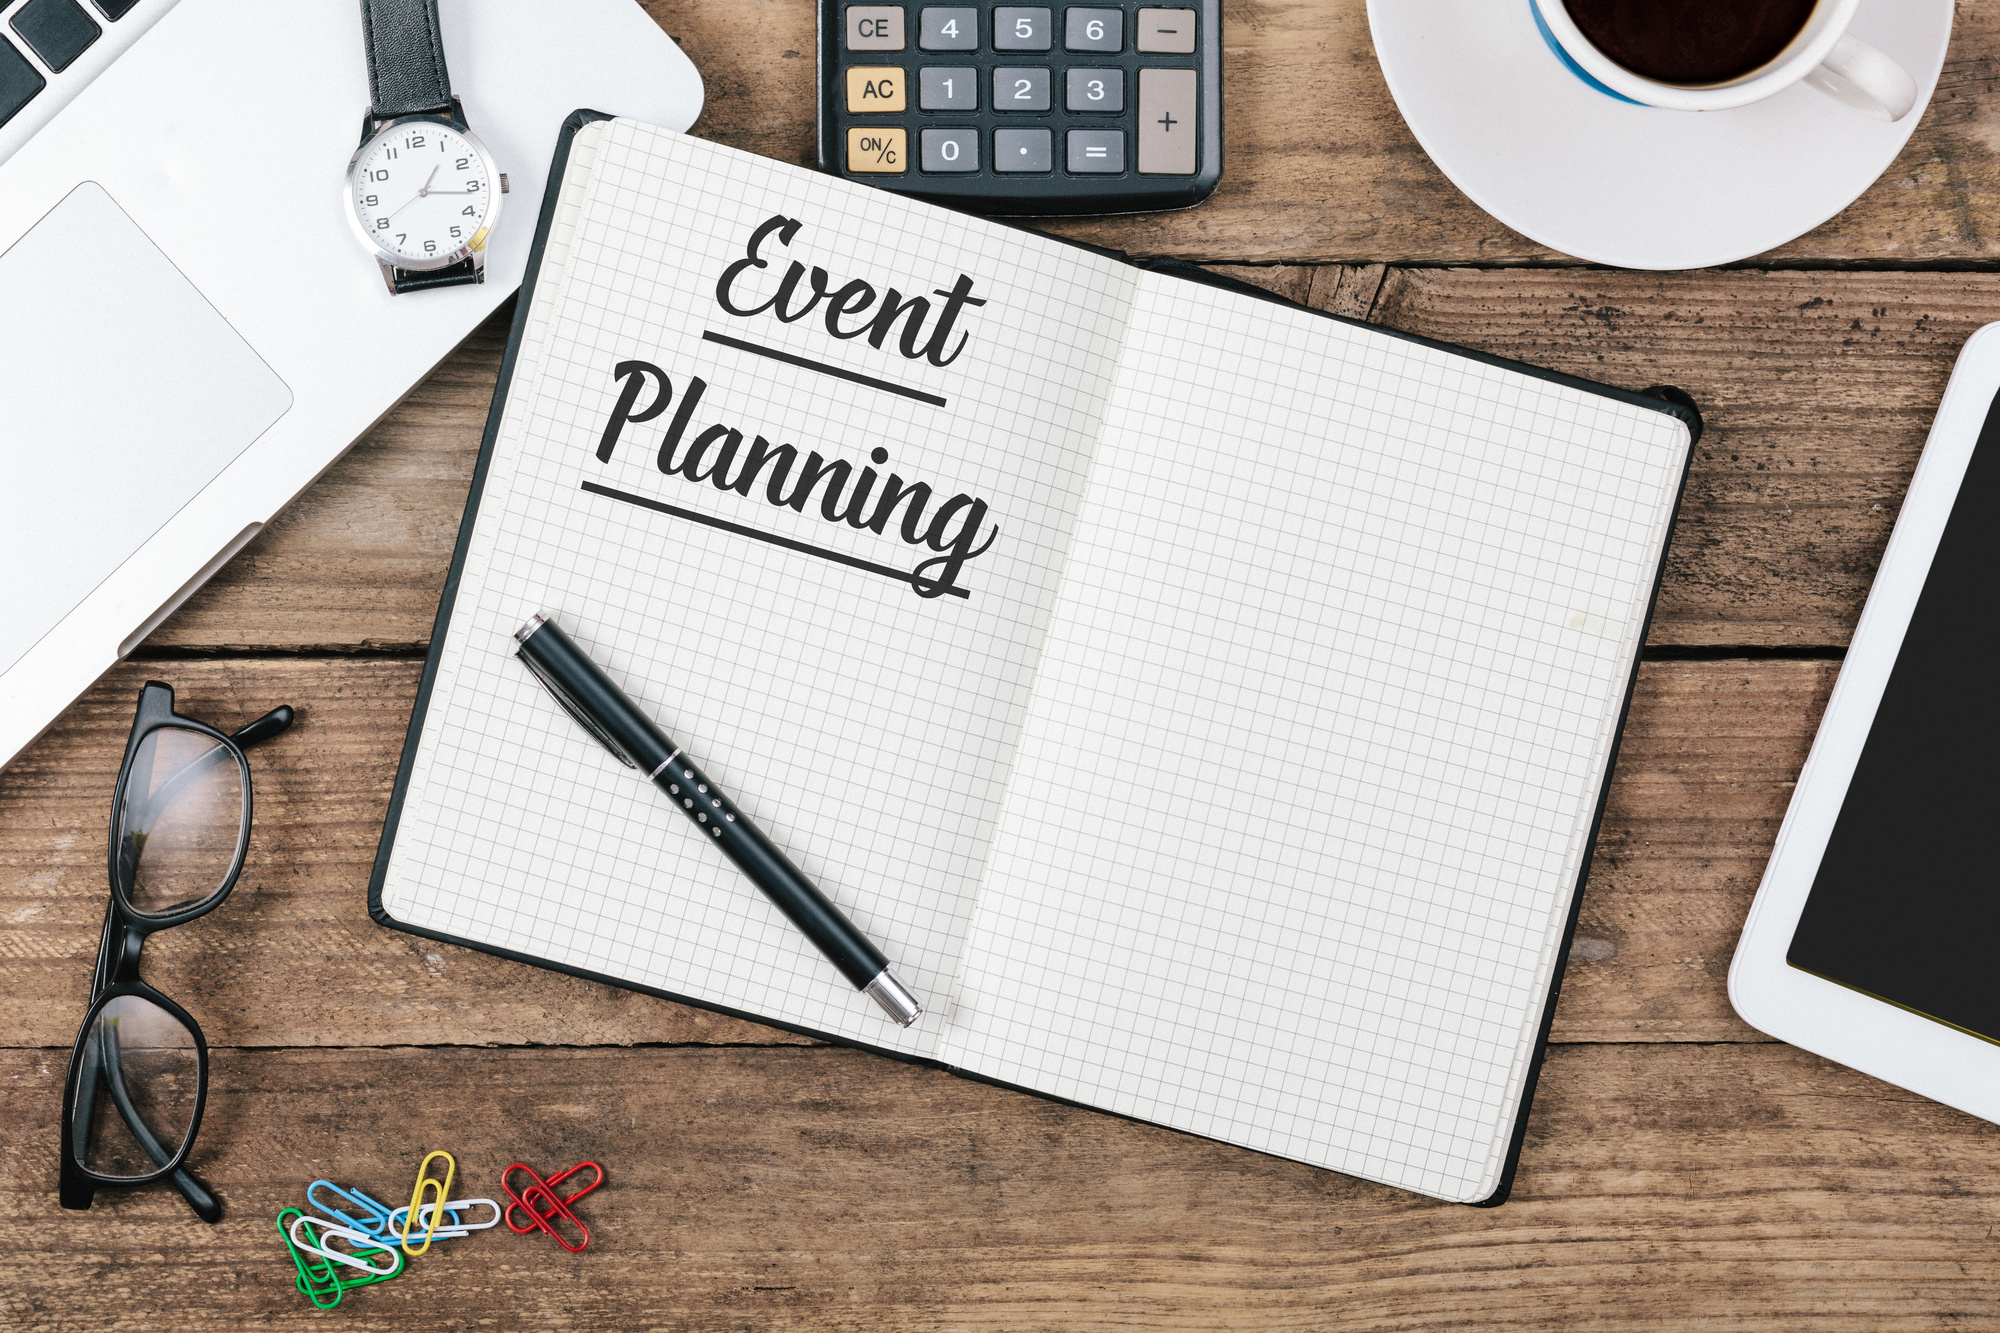 7 Event Planning Tips to Streamline the Process